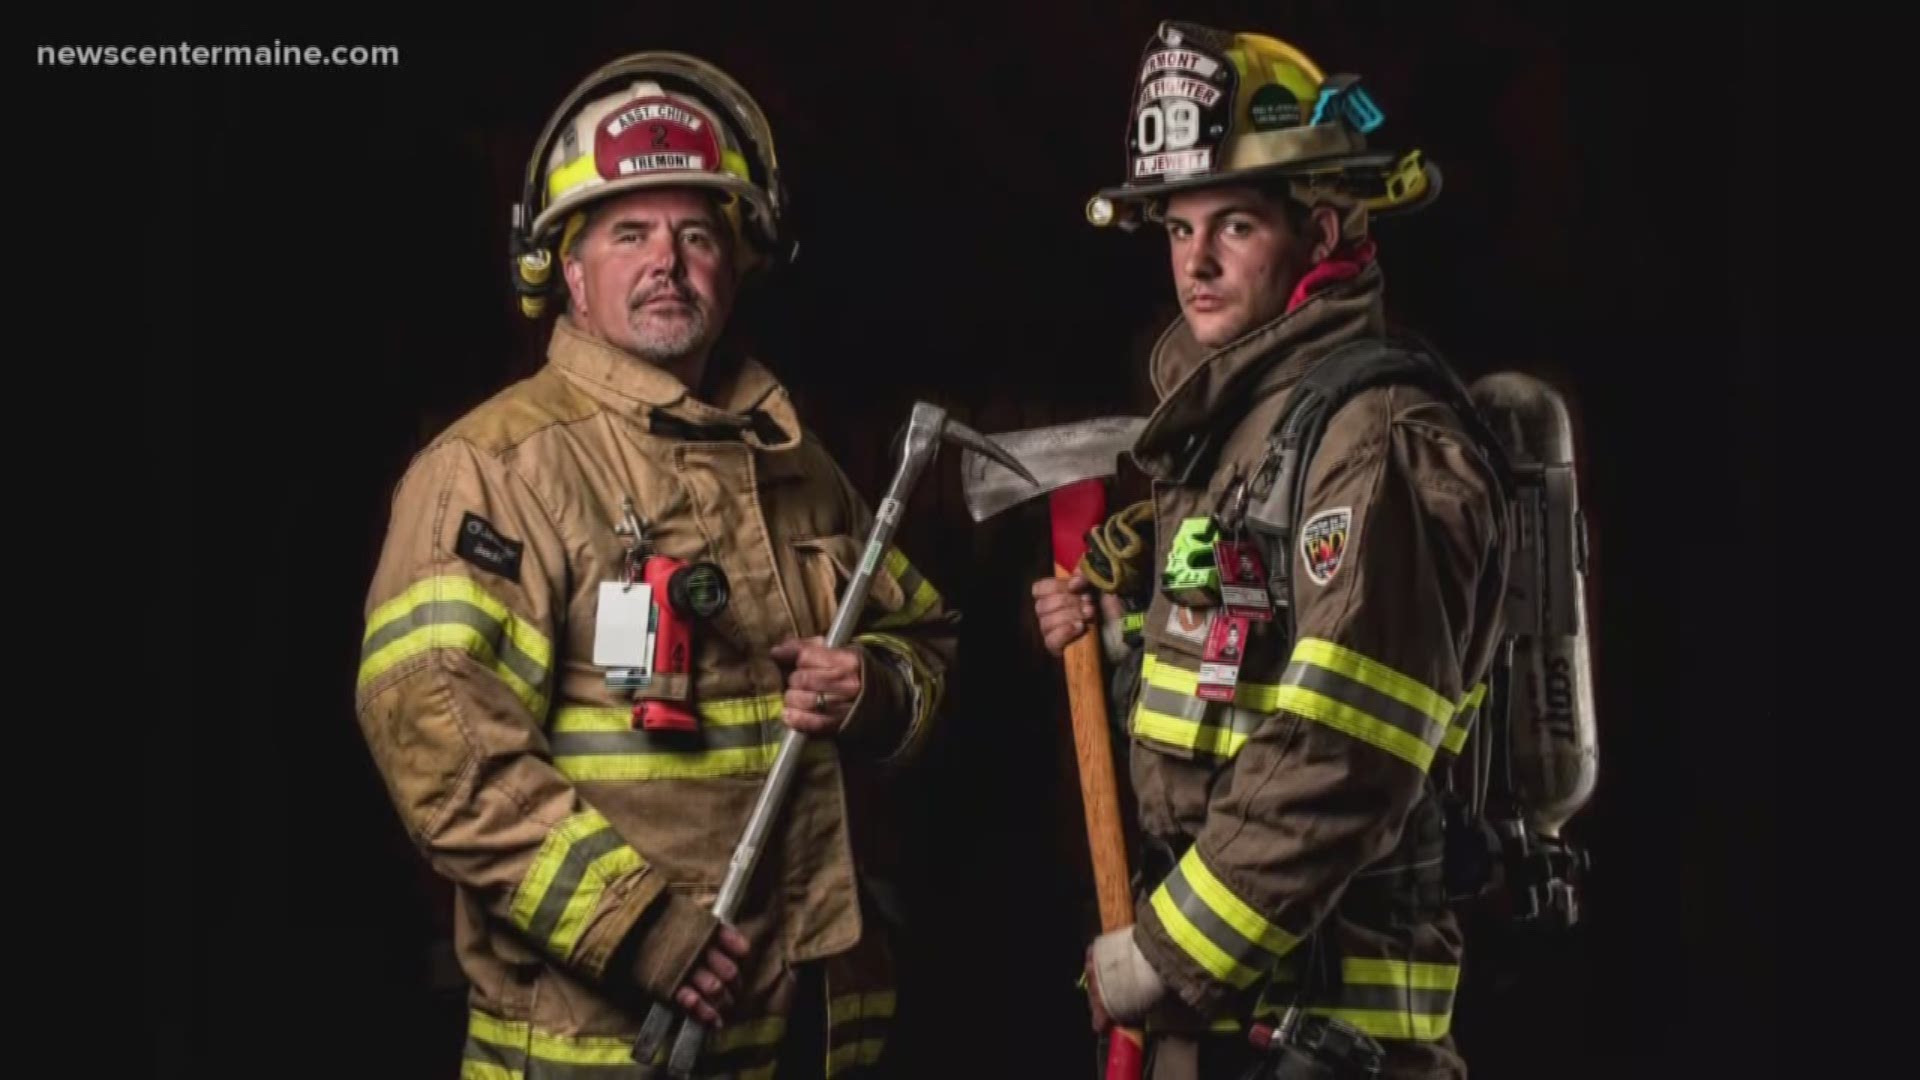 Photographer pays tribute to first responders